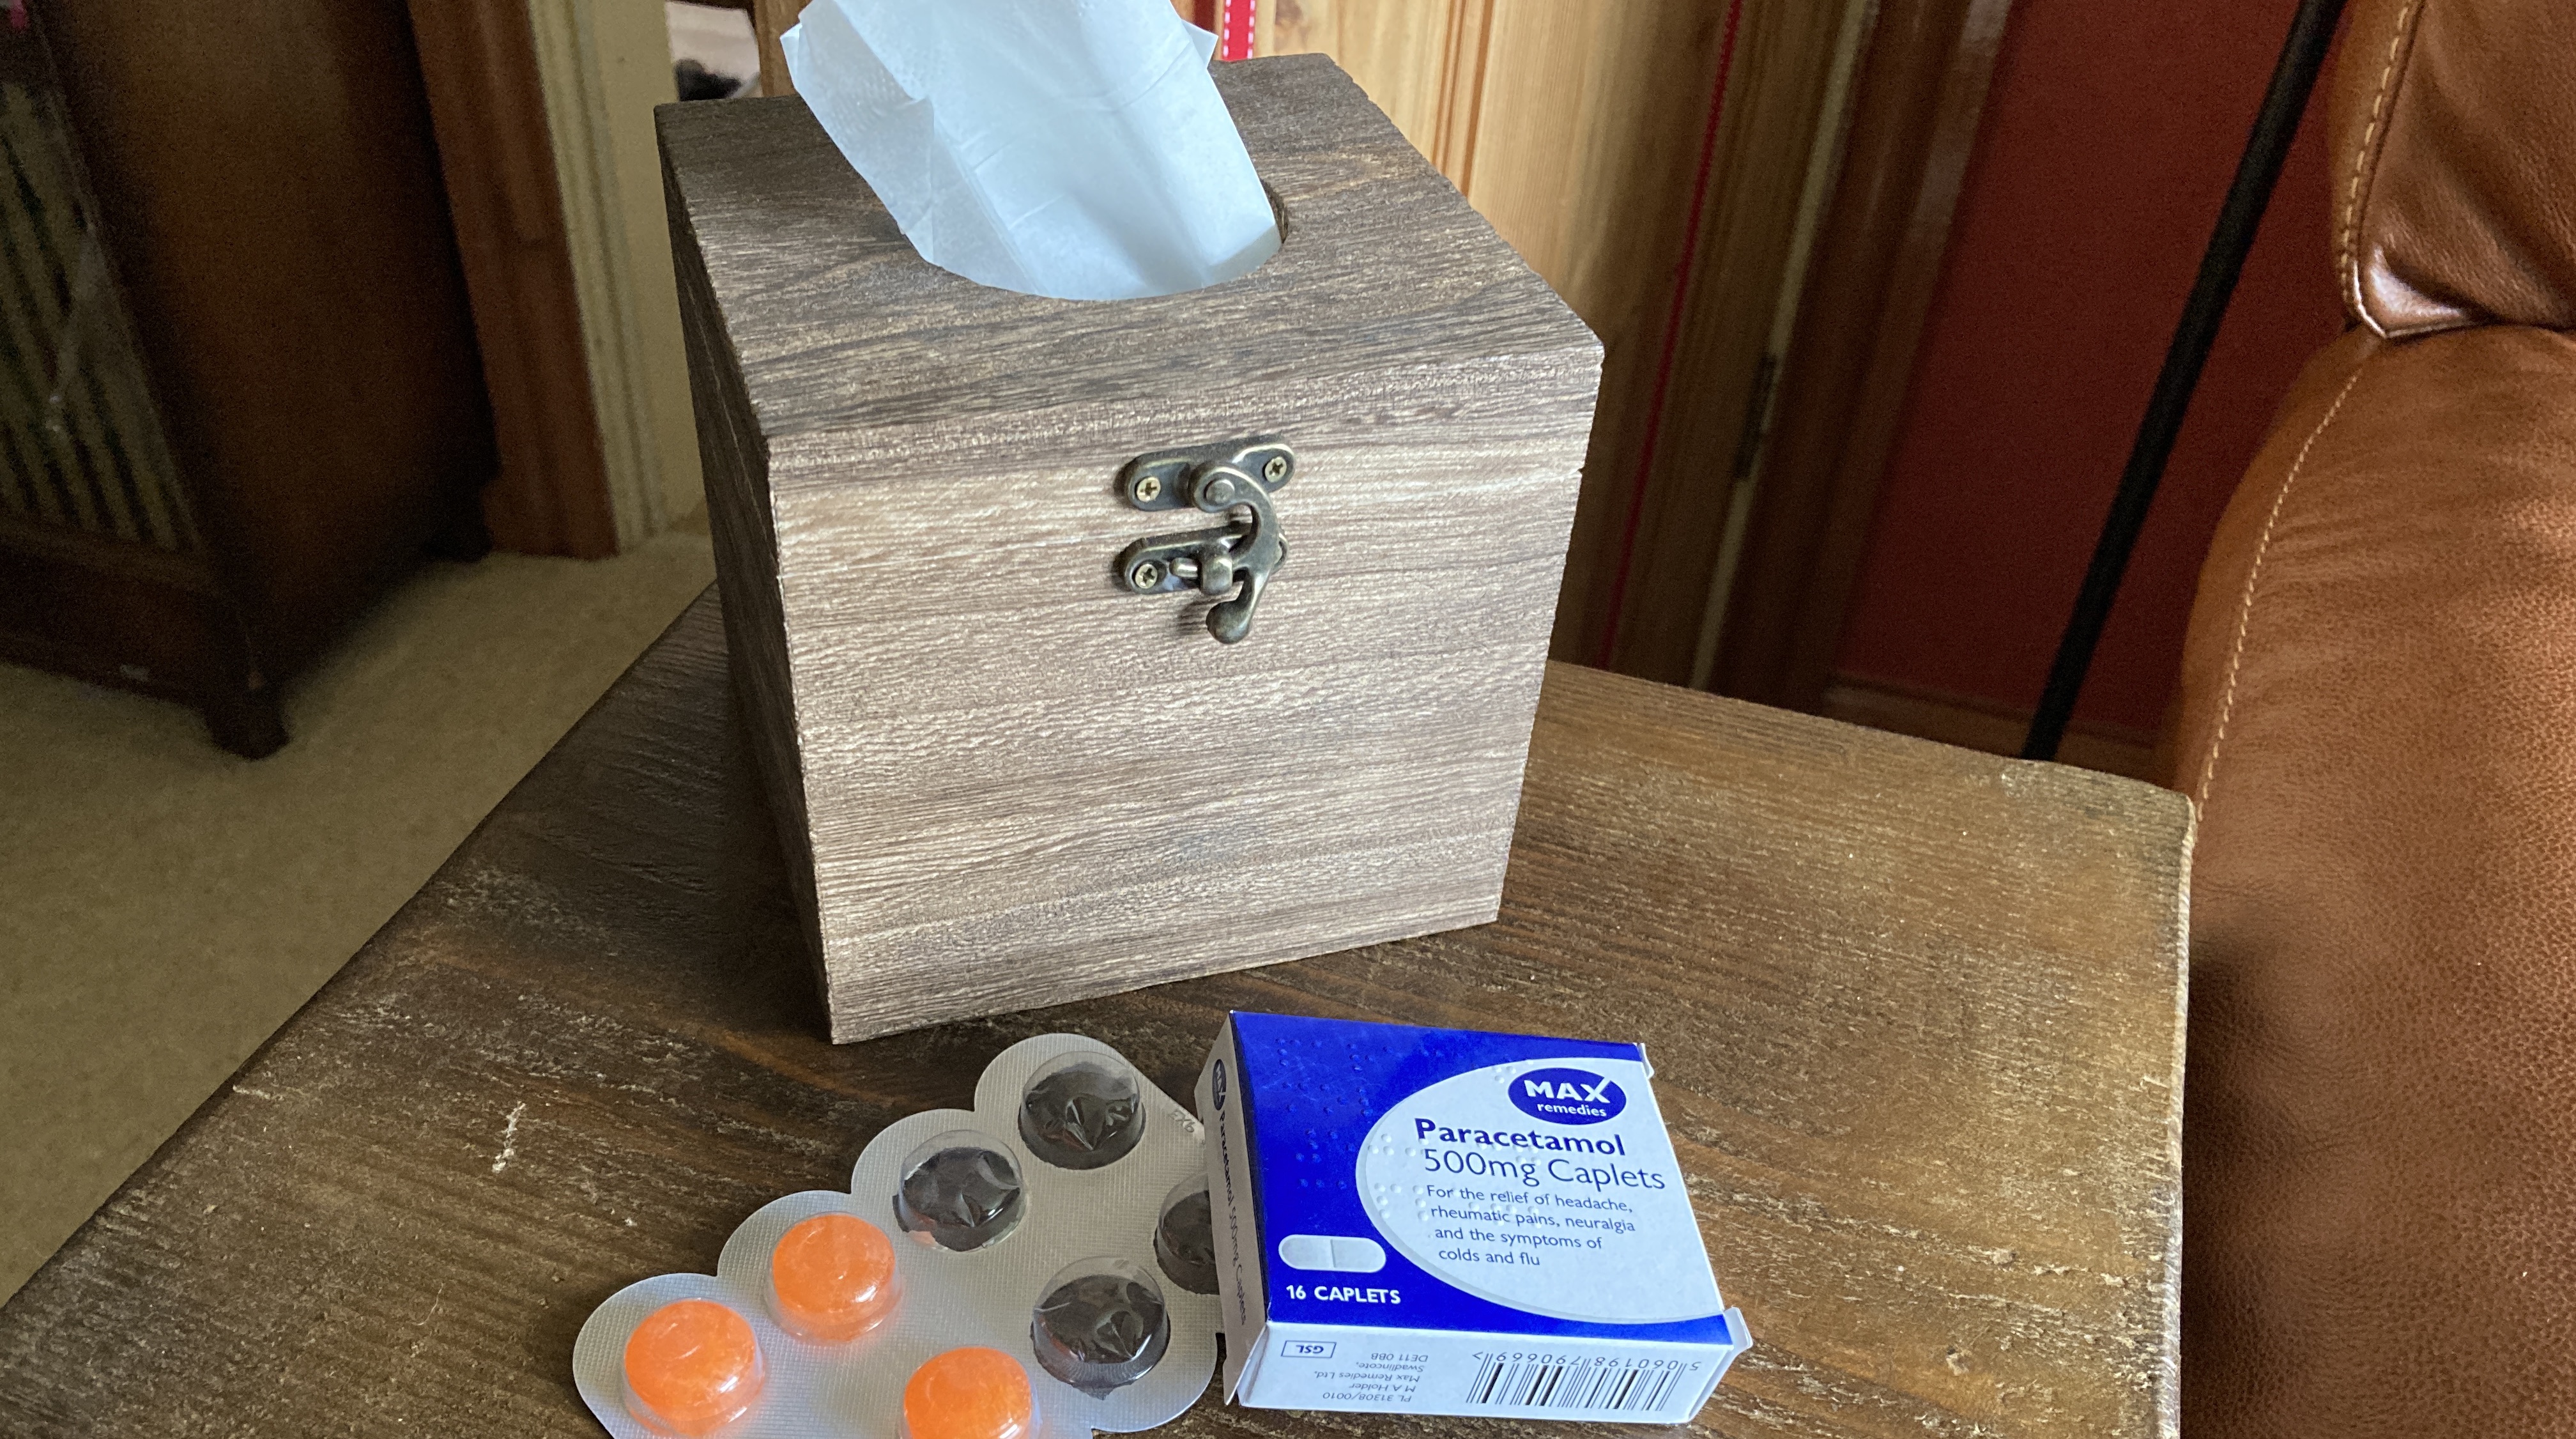 A wooden box of tissues, a packet of paracetamol and a strip of Strepsils lie on a small wooden table.